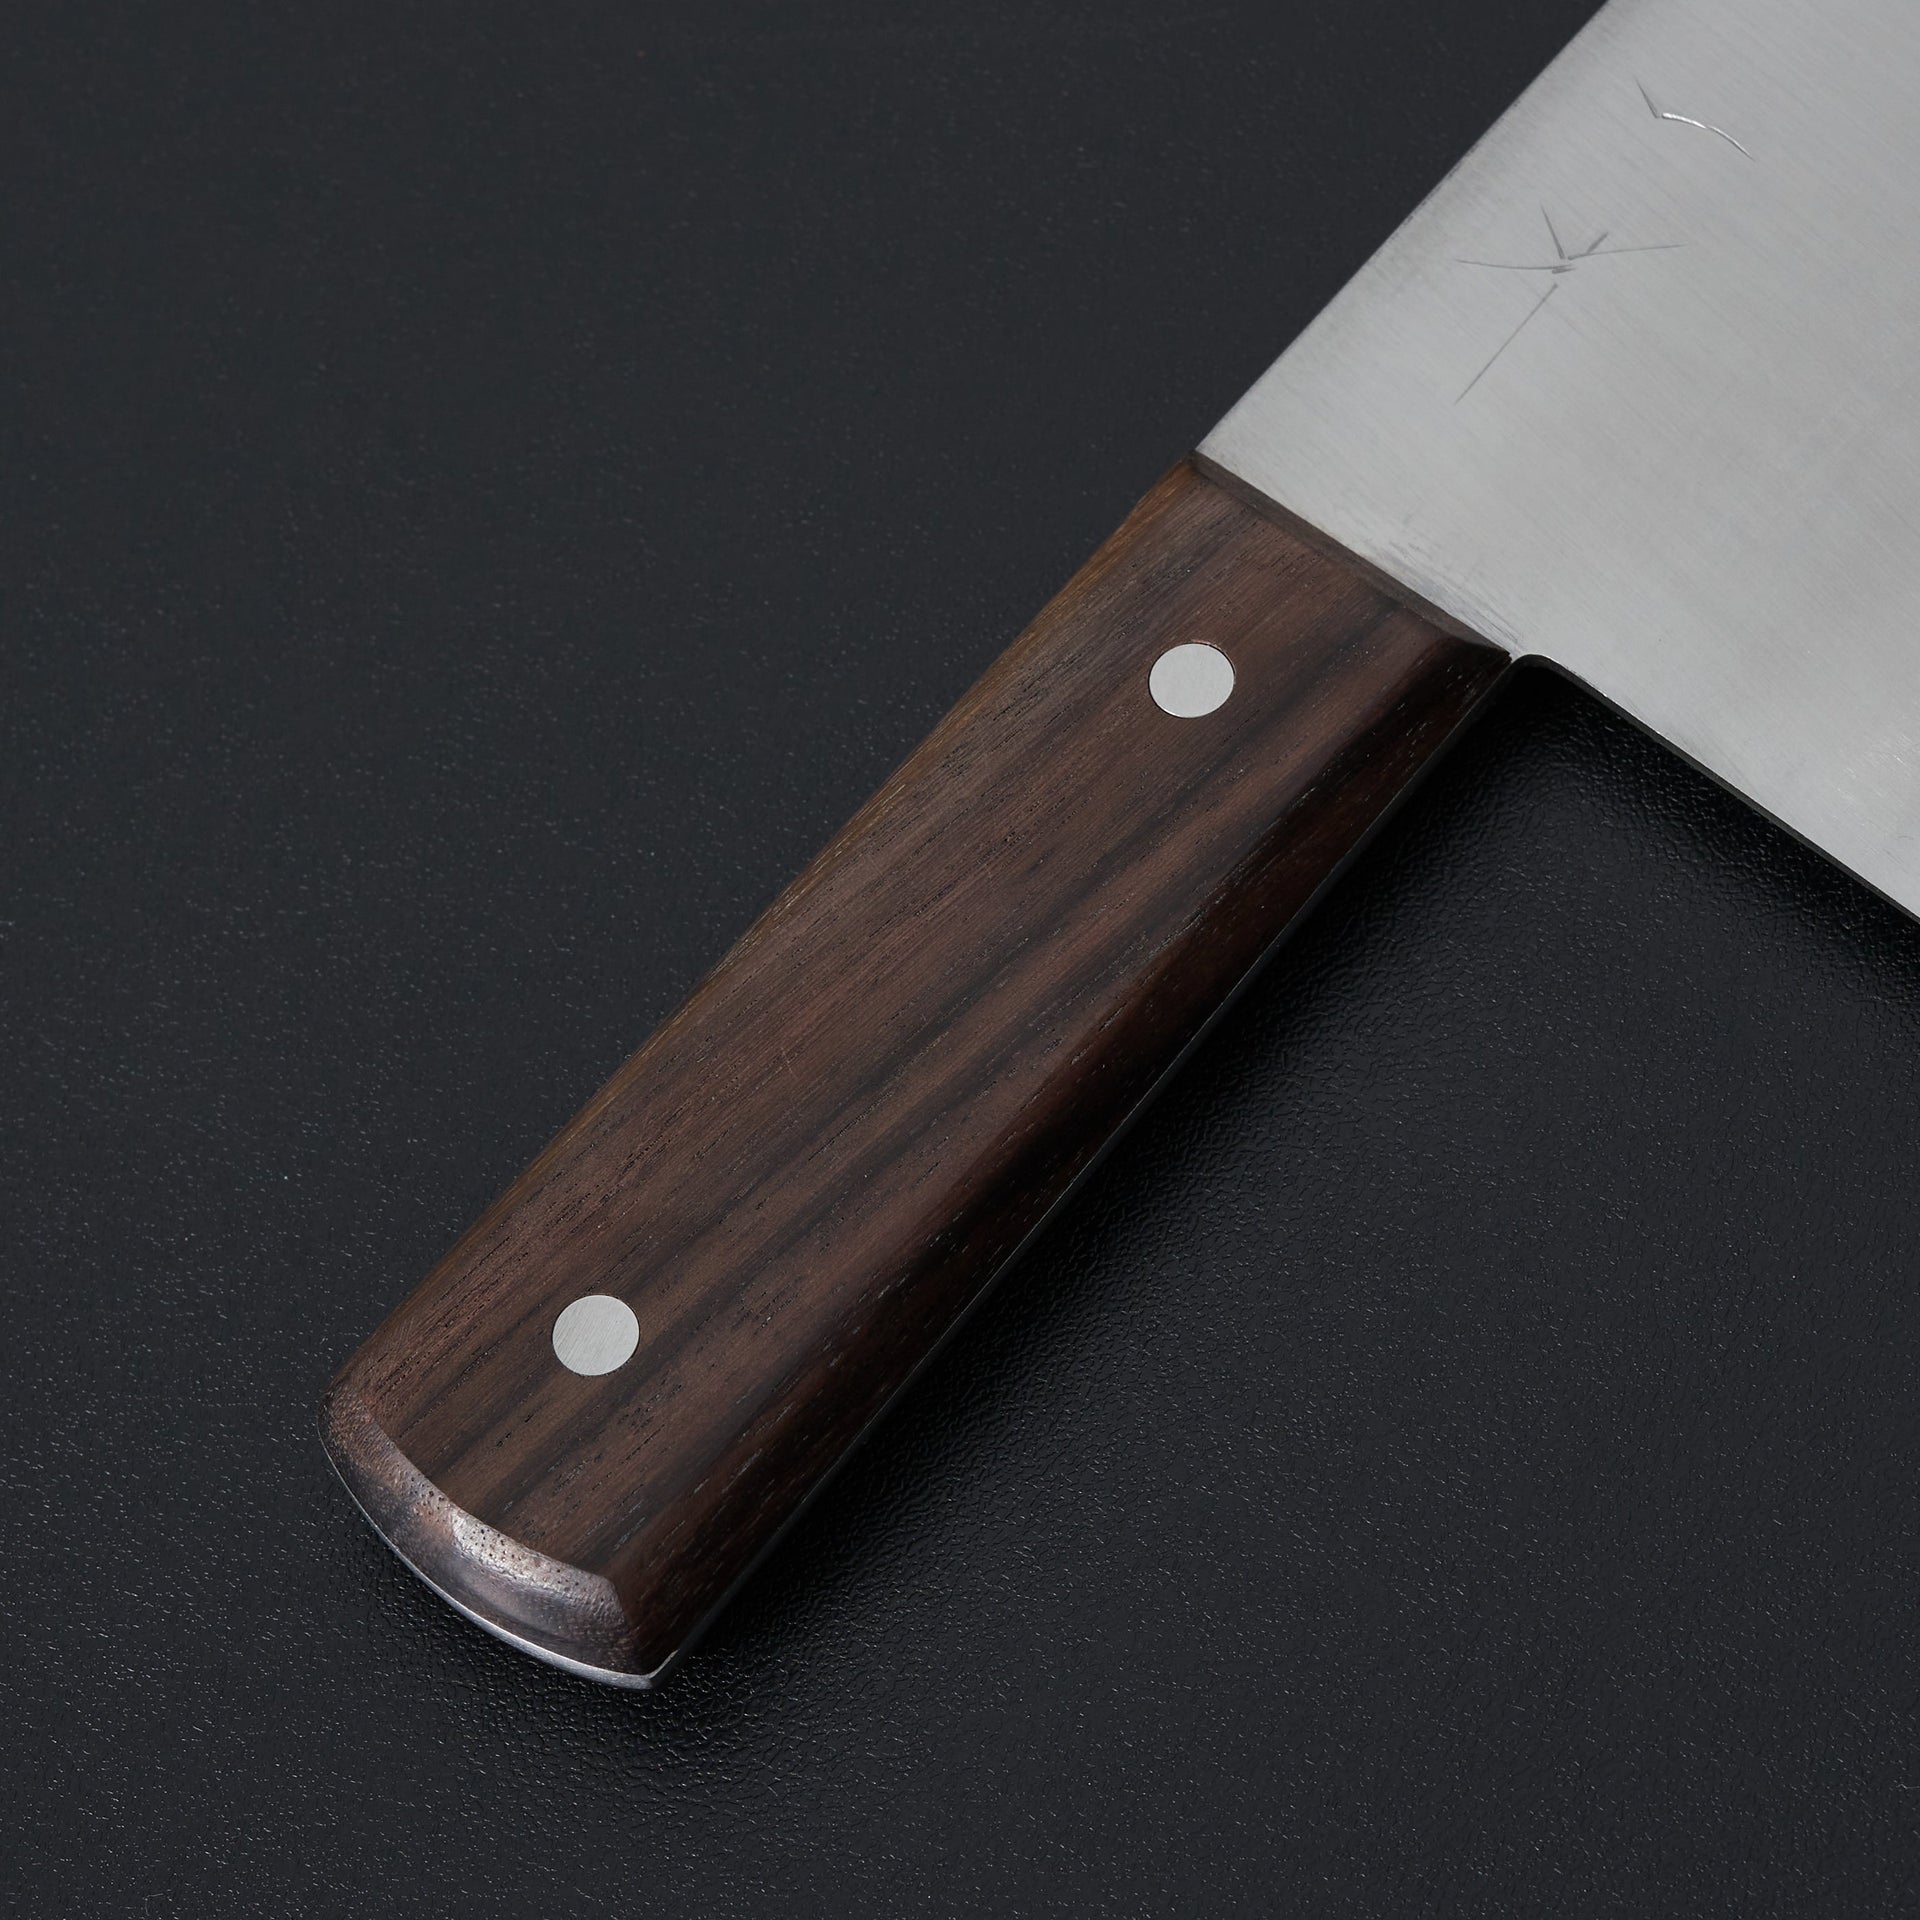 Hitohira Nihonko Carbon Chinese Cleaver 220mm Rosewood Handle-Knife-Hitohira-Carbon Knife Co